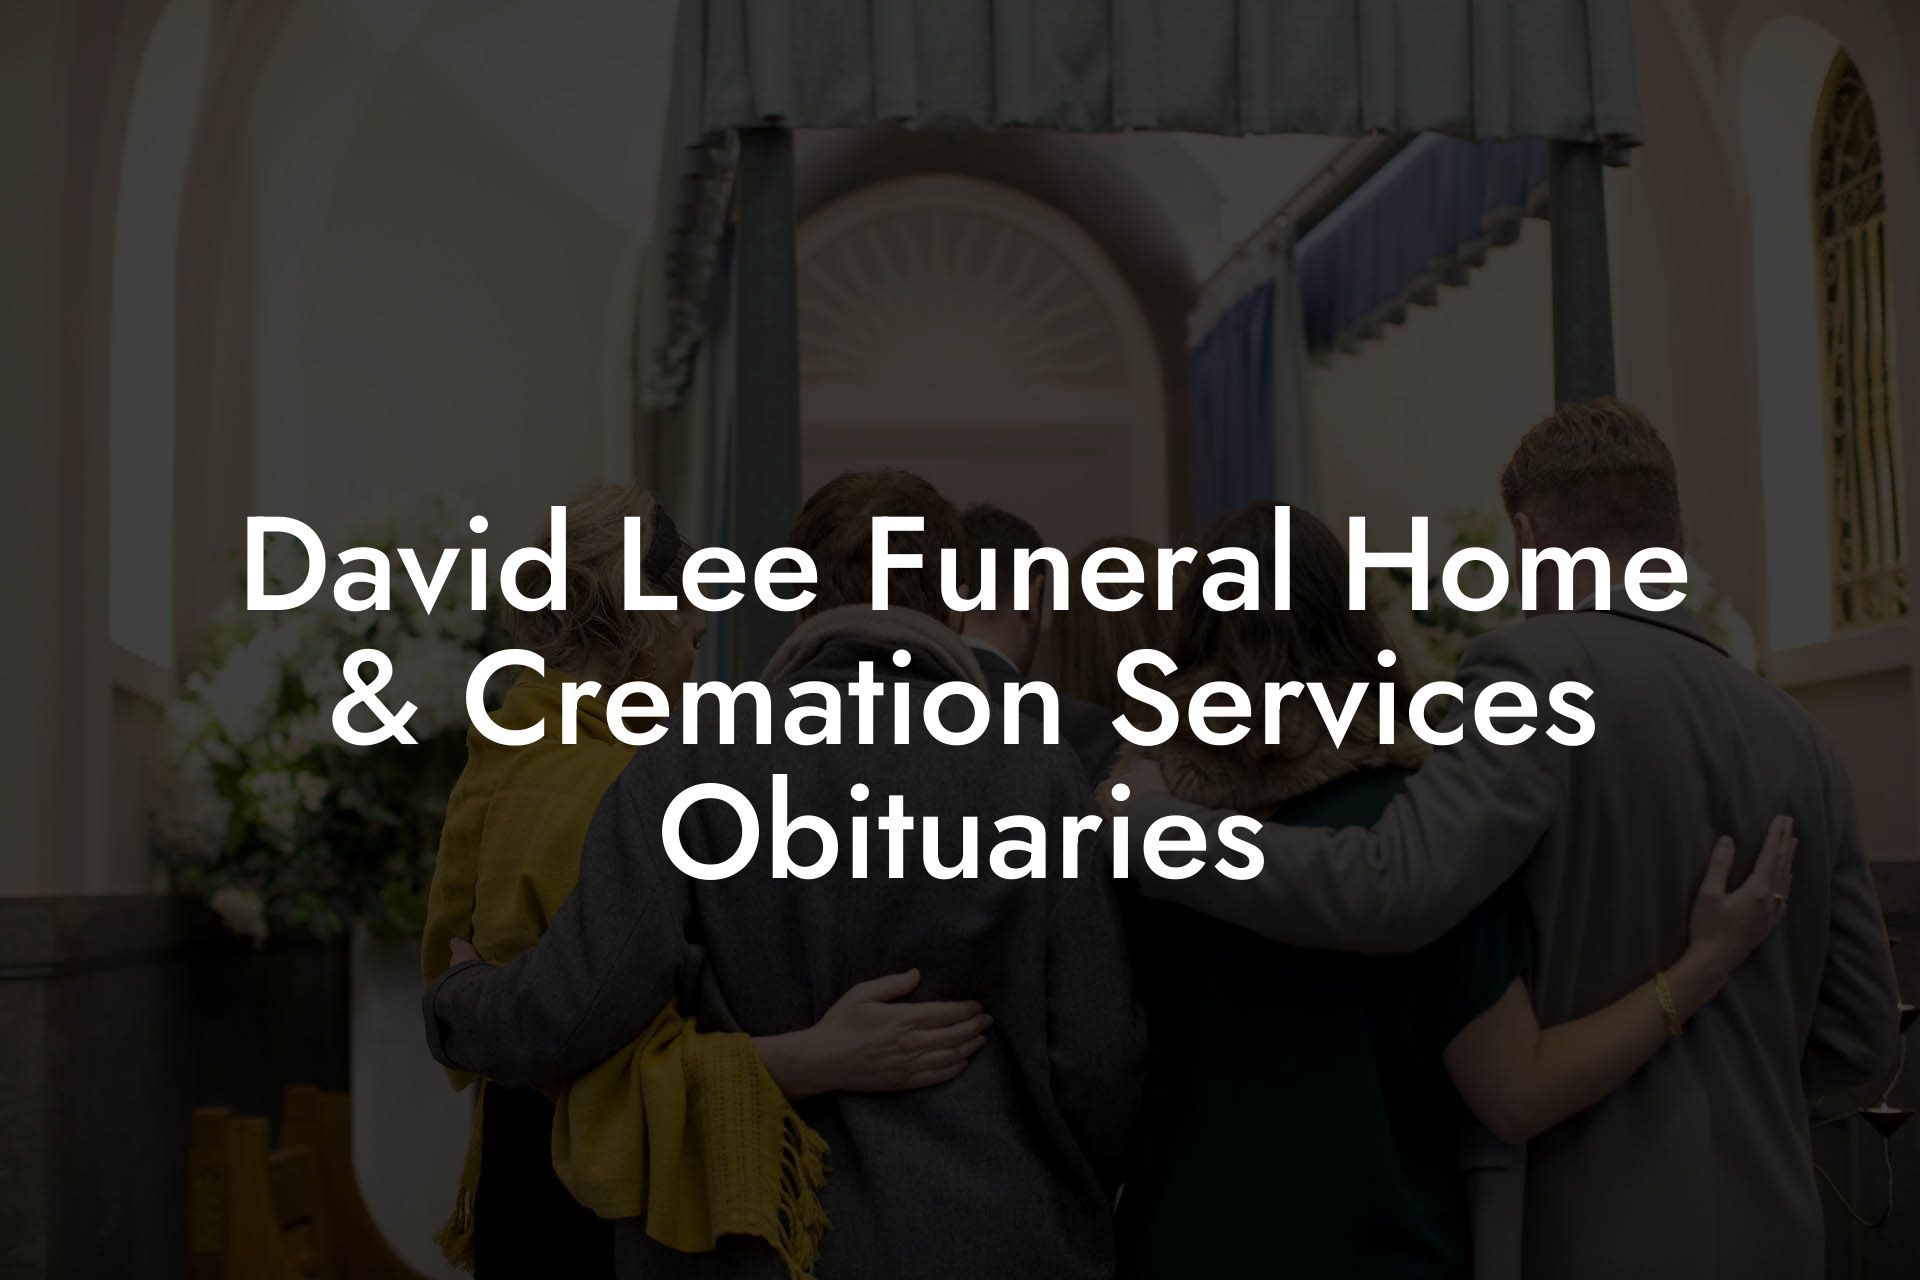 David Lee Funeral Home & Cremation Services Obituaries